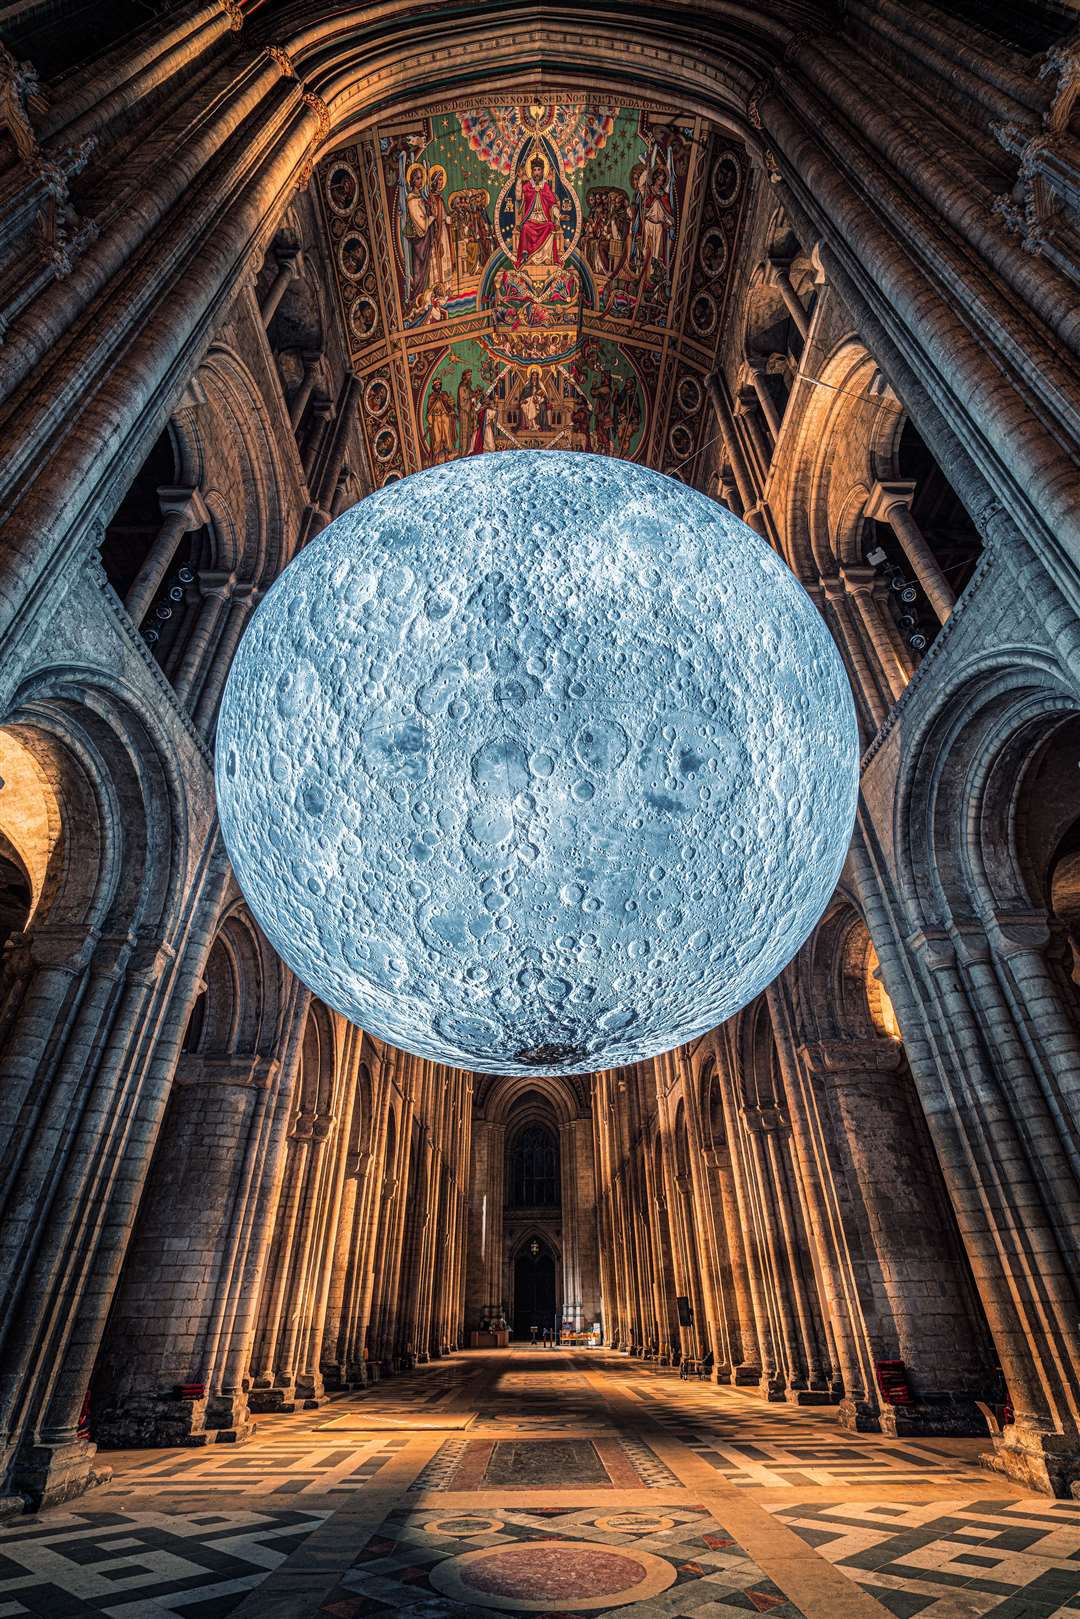 Each centimetre of the sphere equates to 5km of the moon's surface. Pic: James Billings